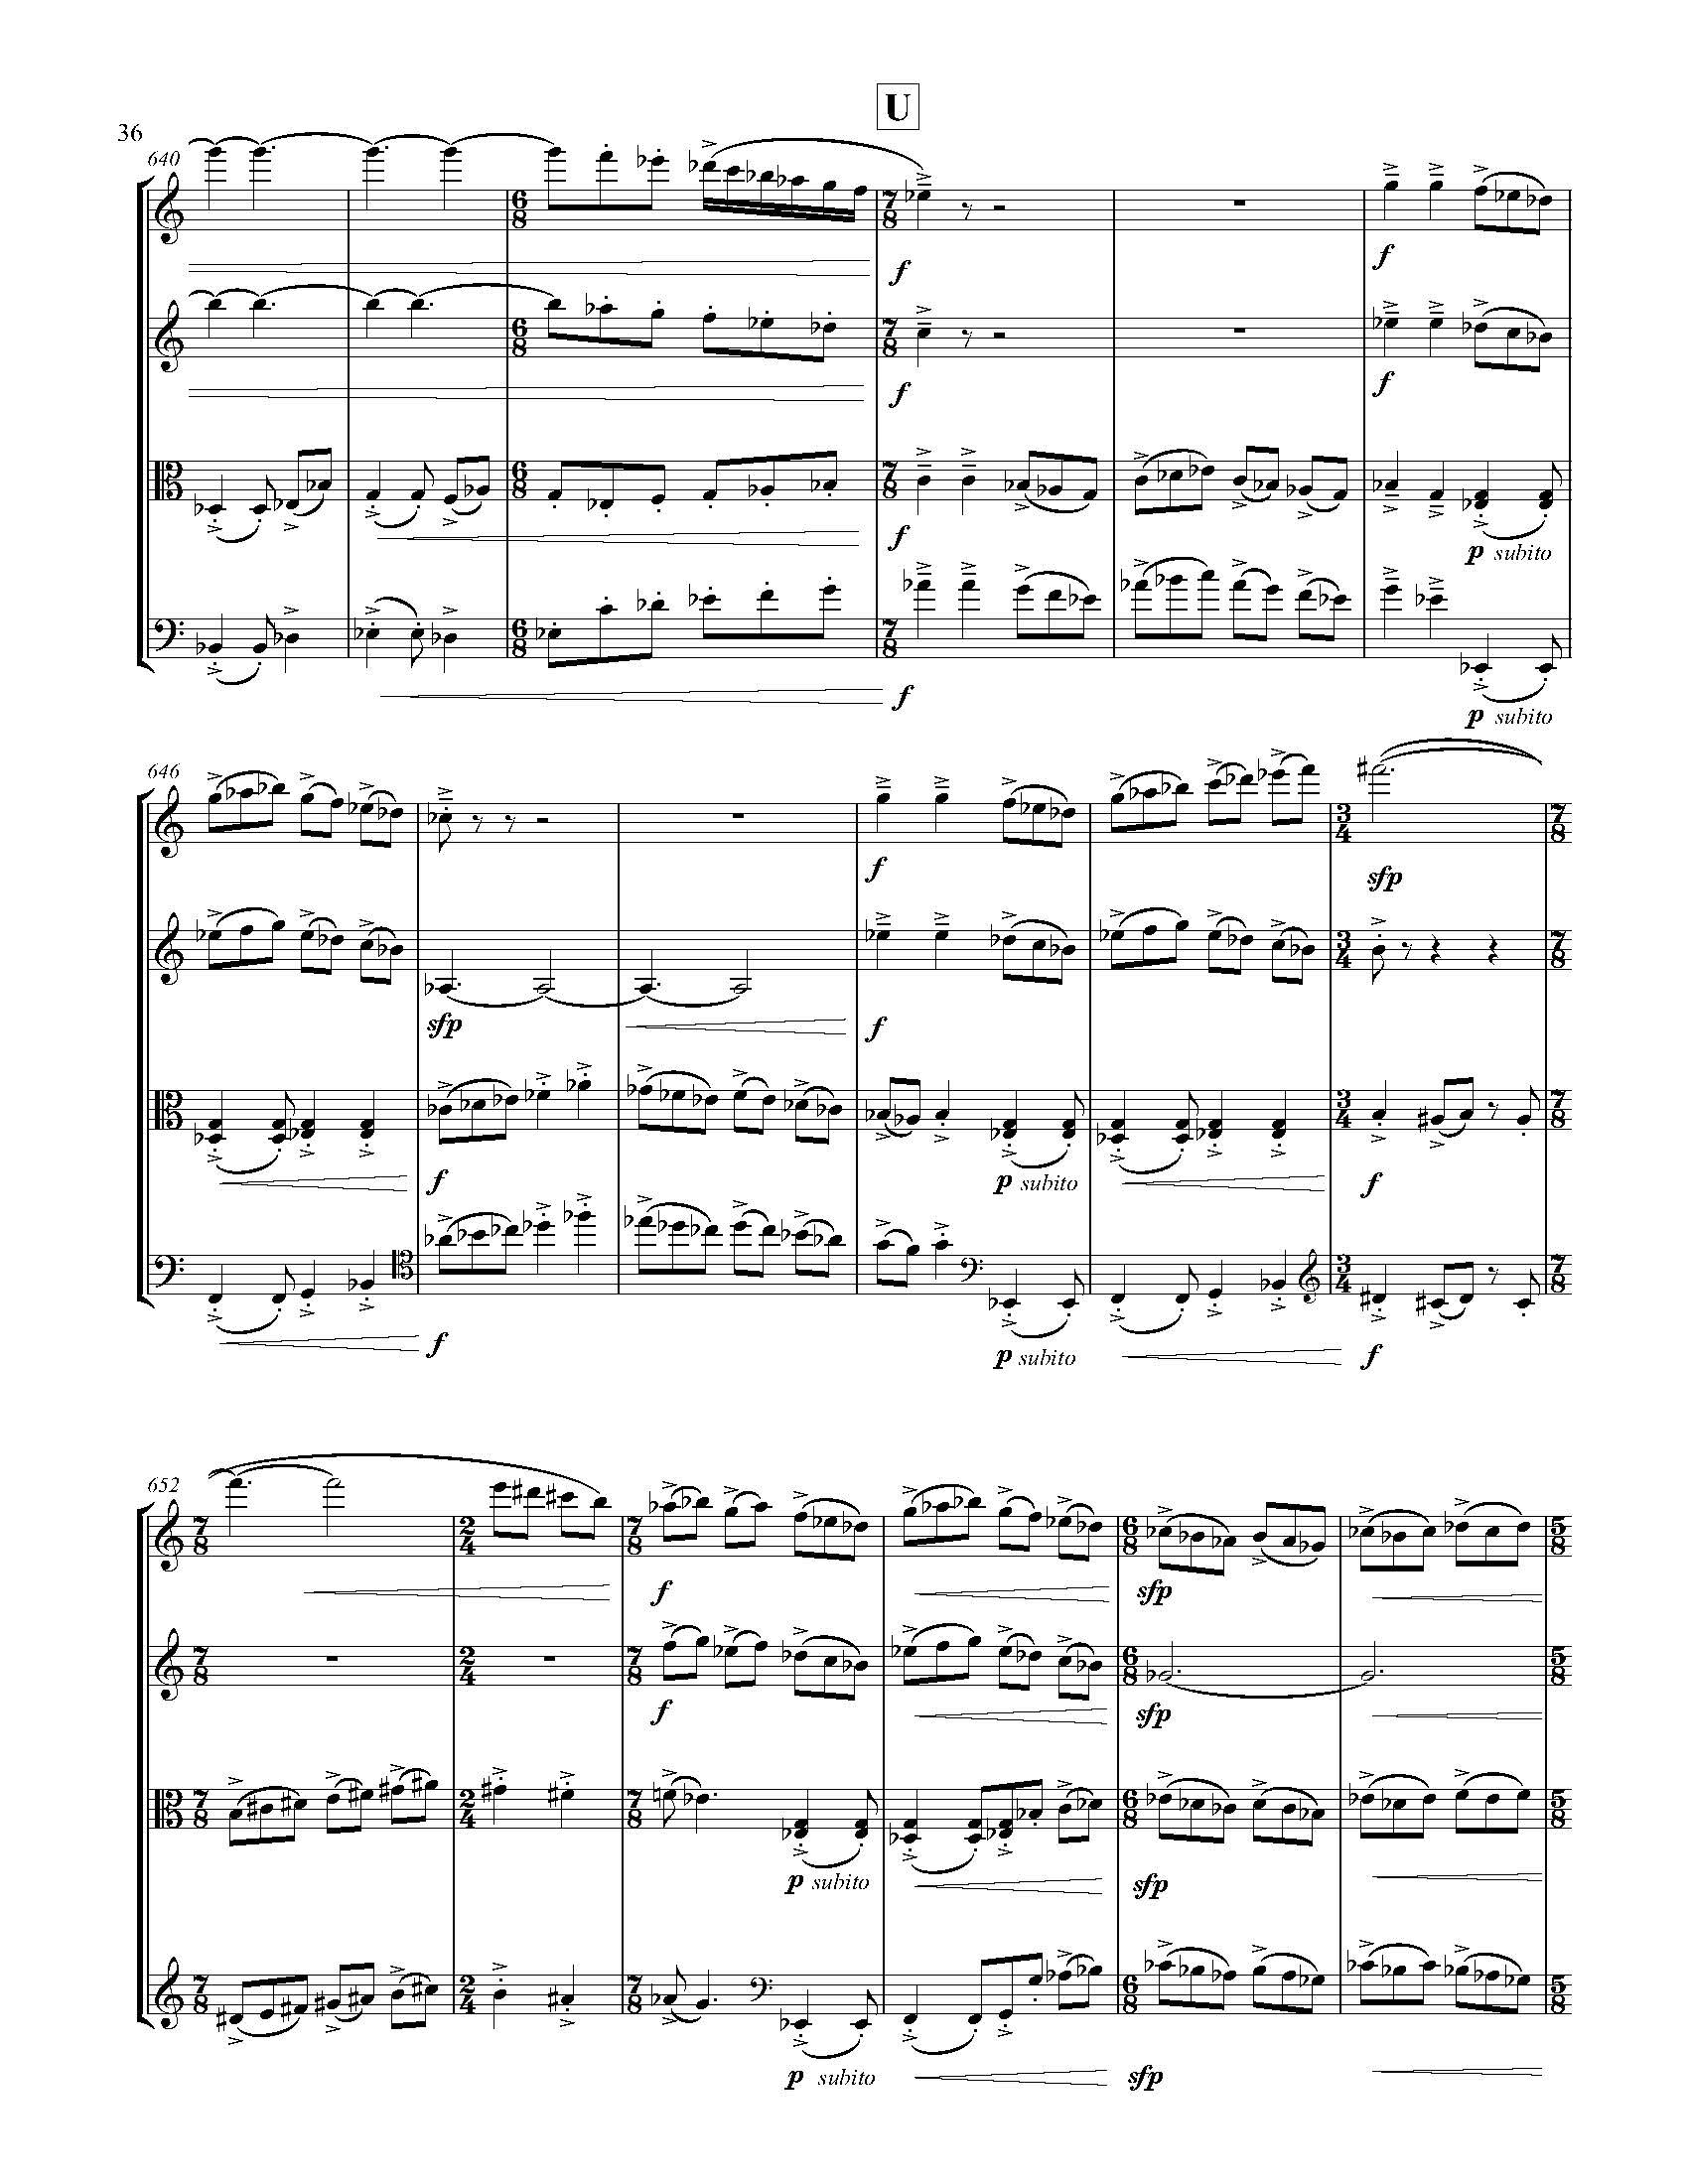 A Country of Vast Designs - Complete Score_Page_42.jpg